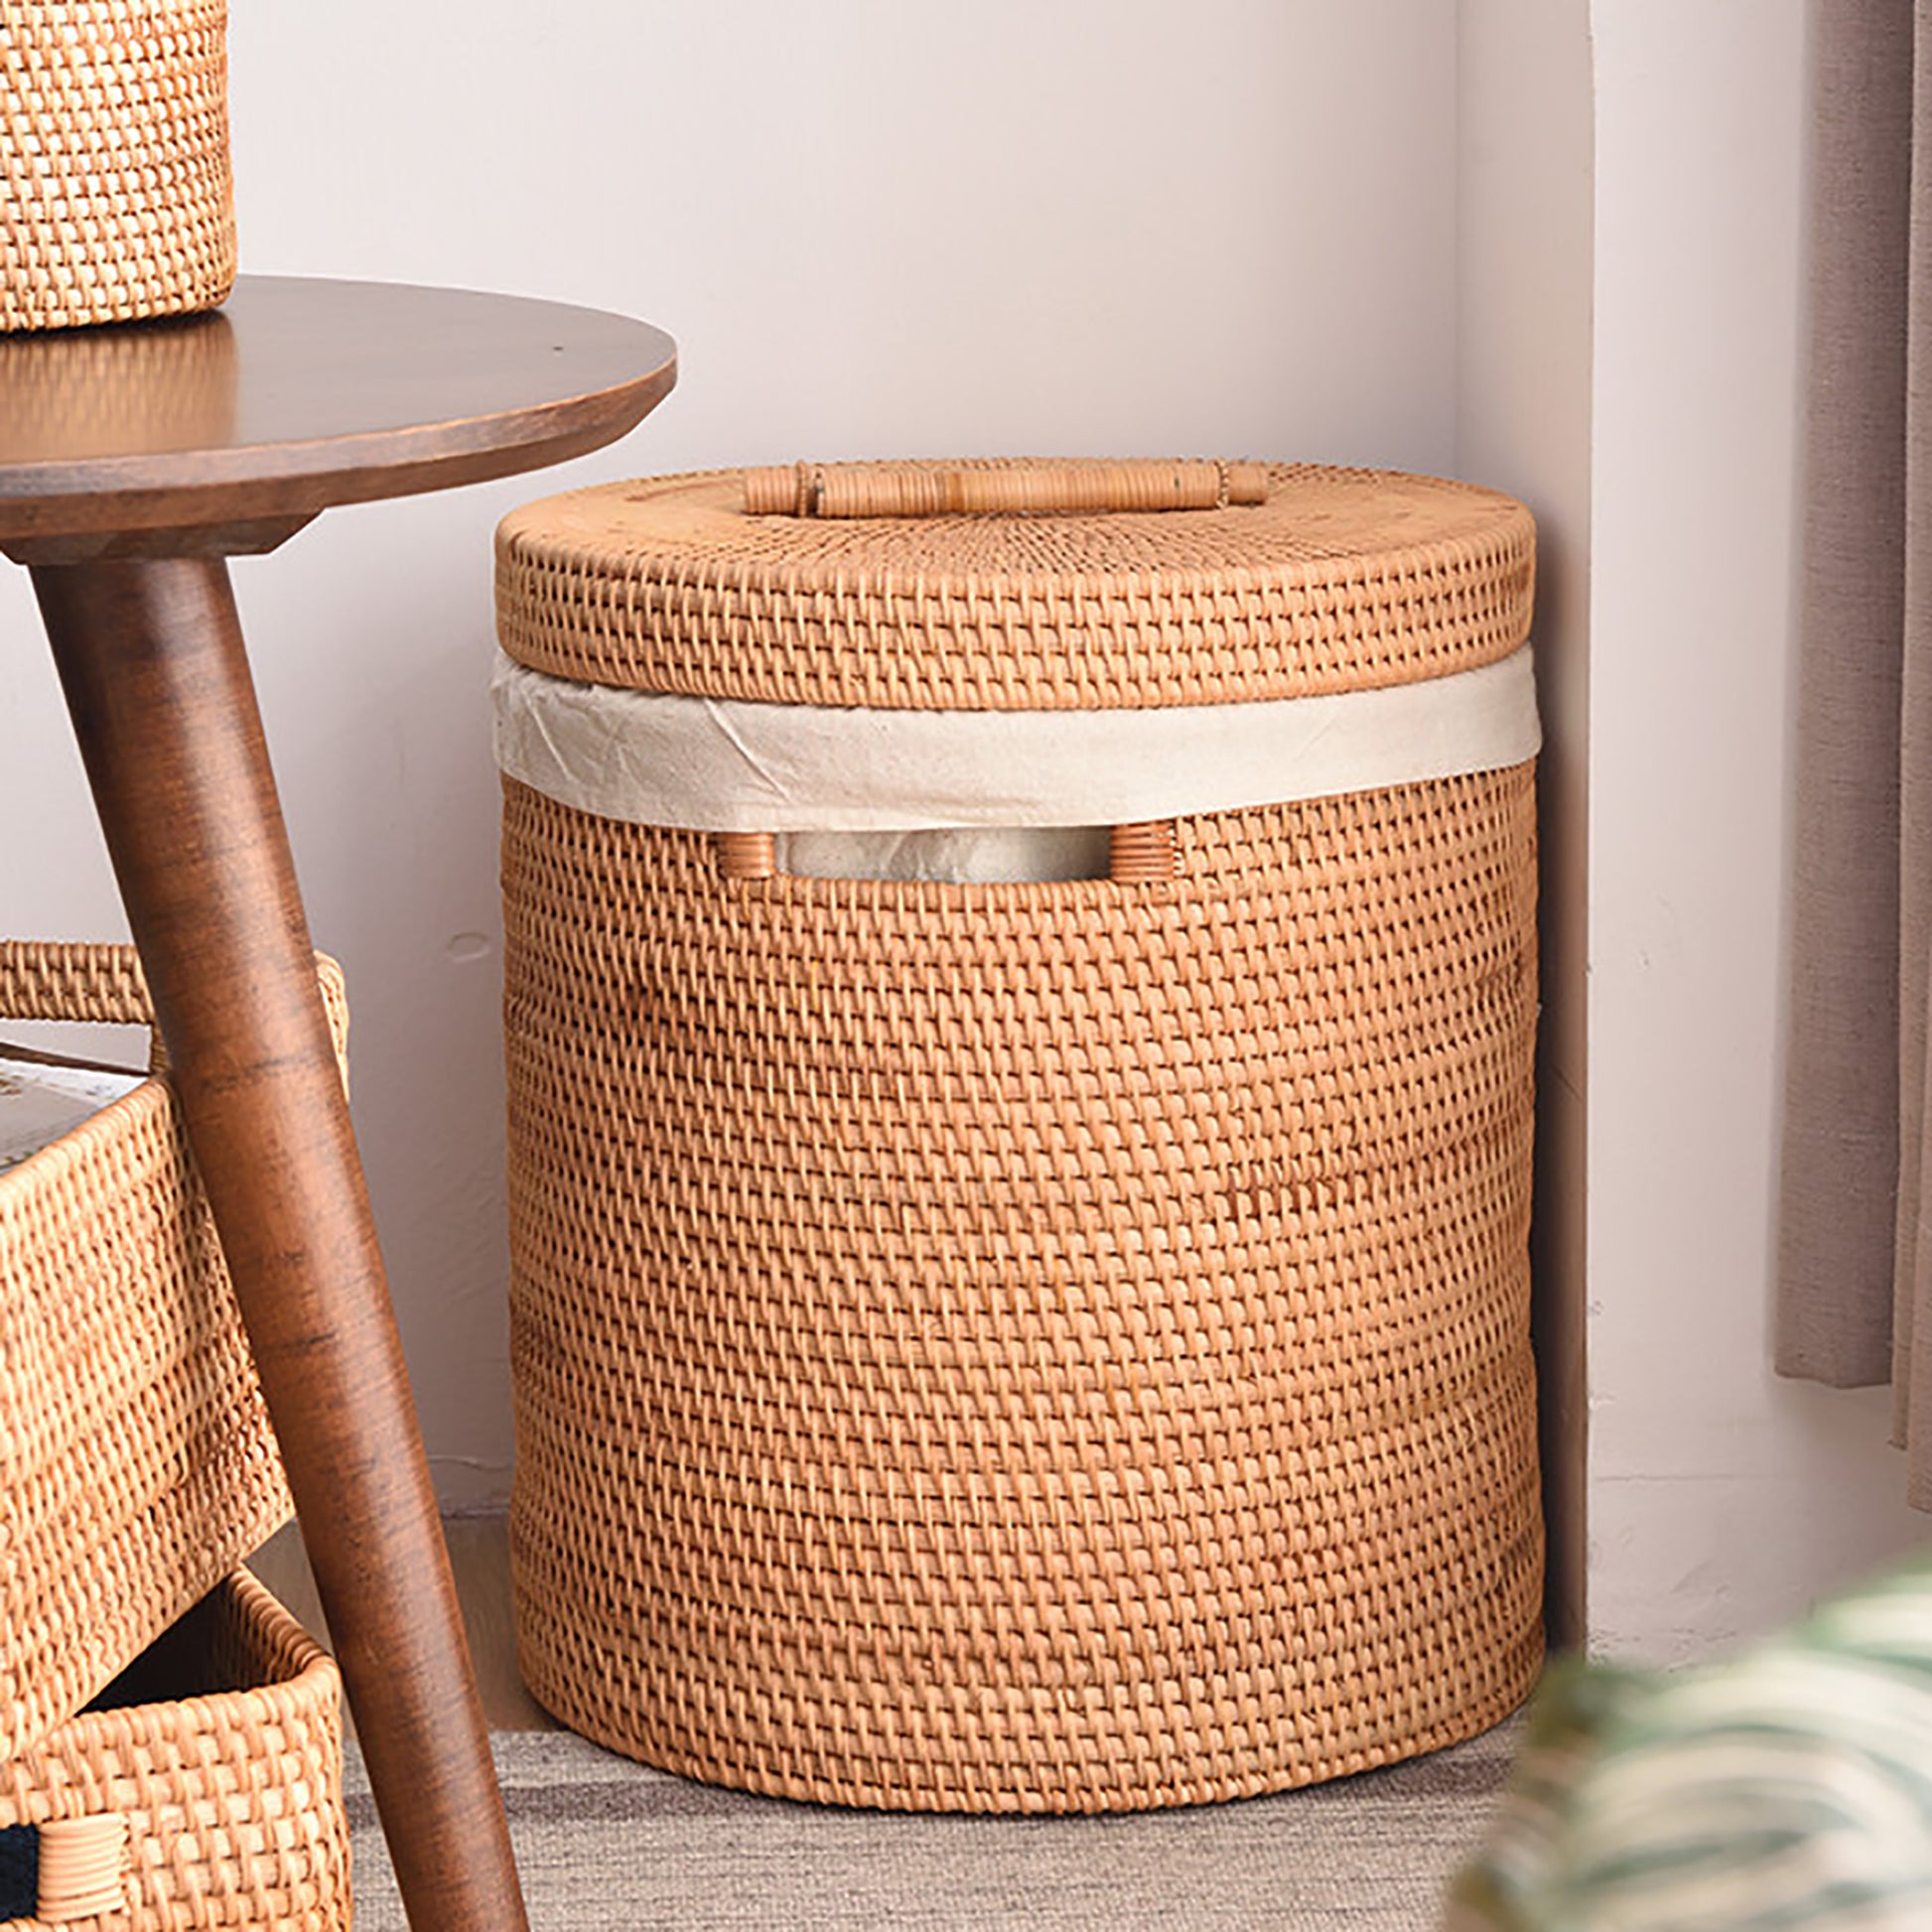 Laundry basket - Home